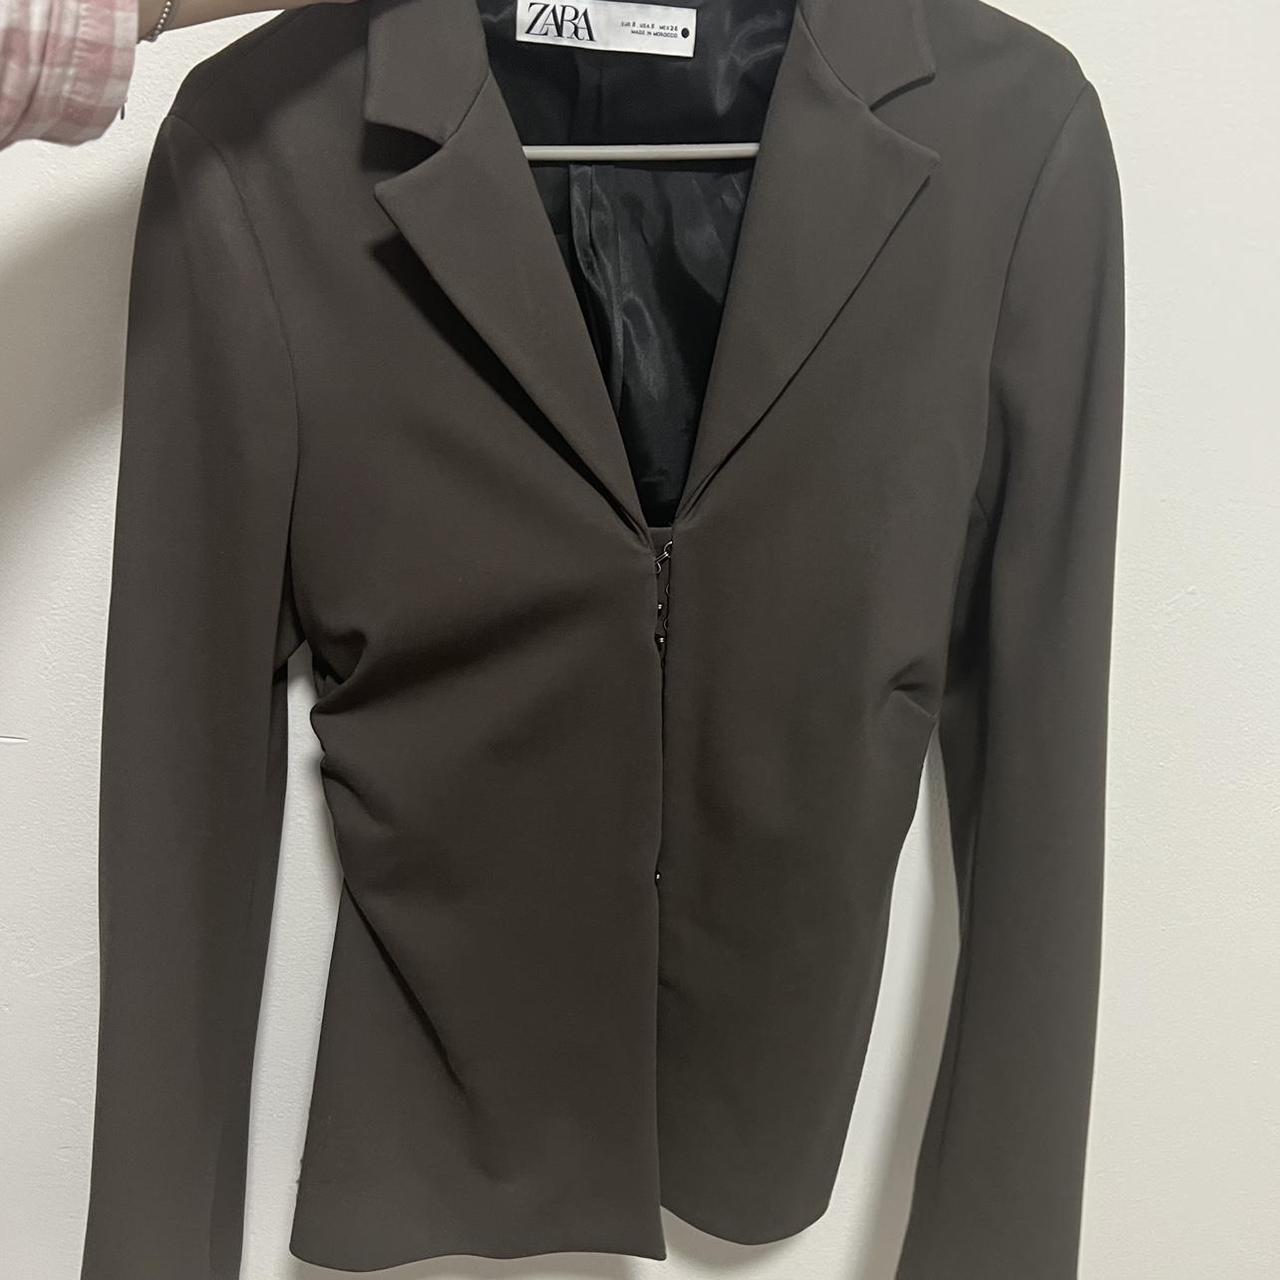 Dion Lee Women's Grey and Khaki Jacket